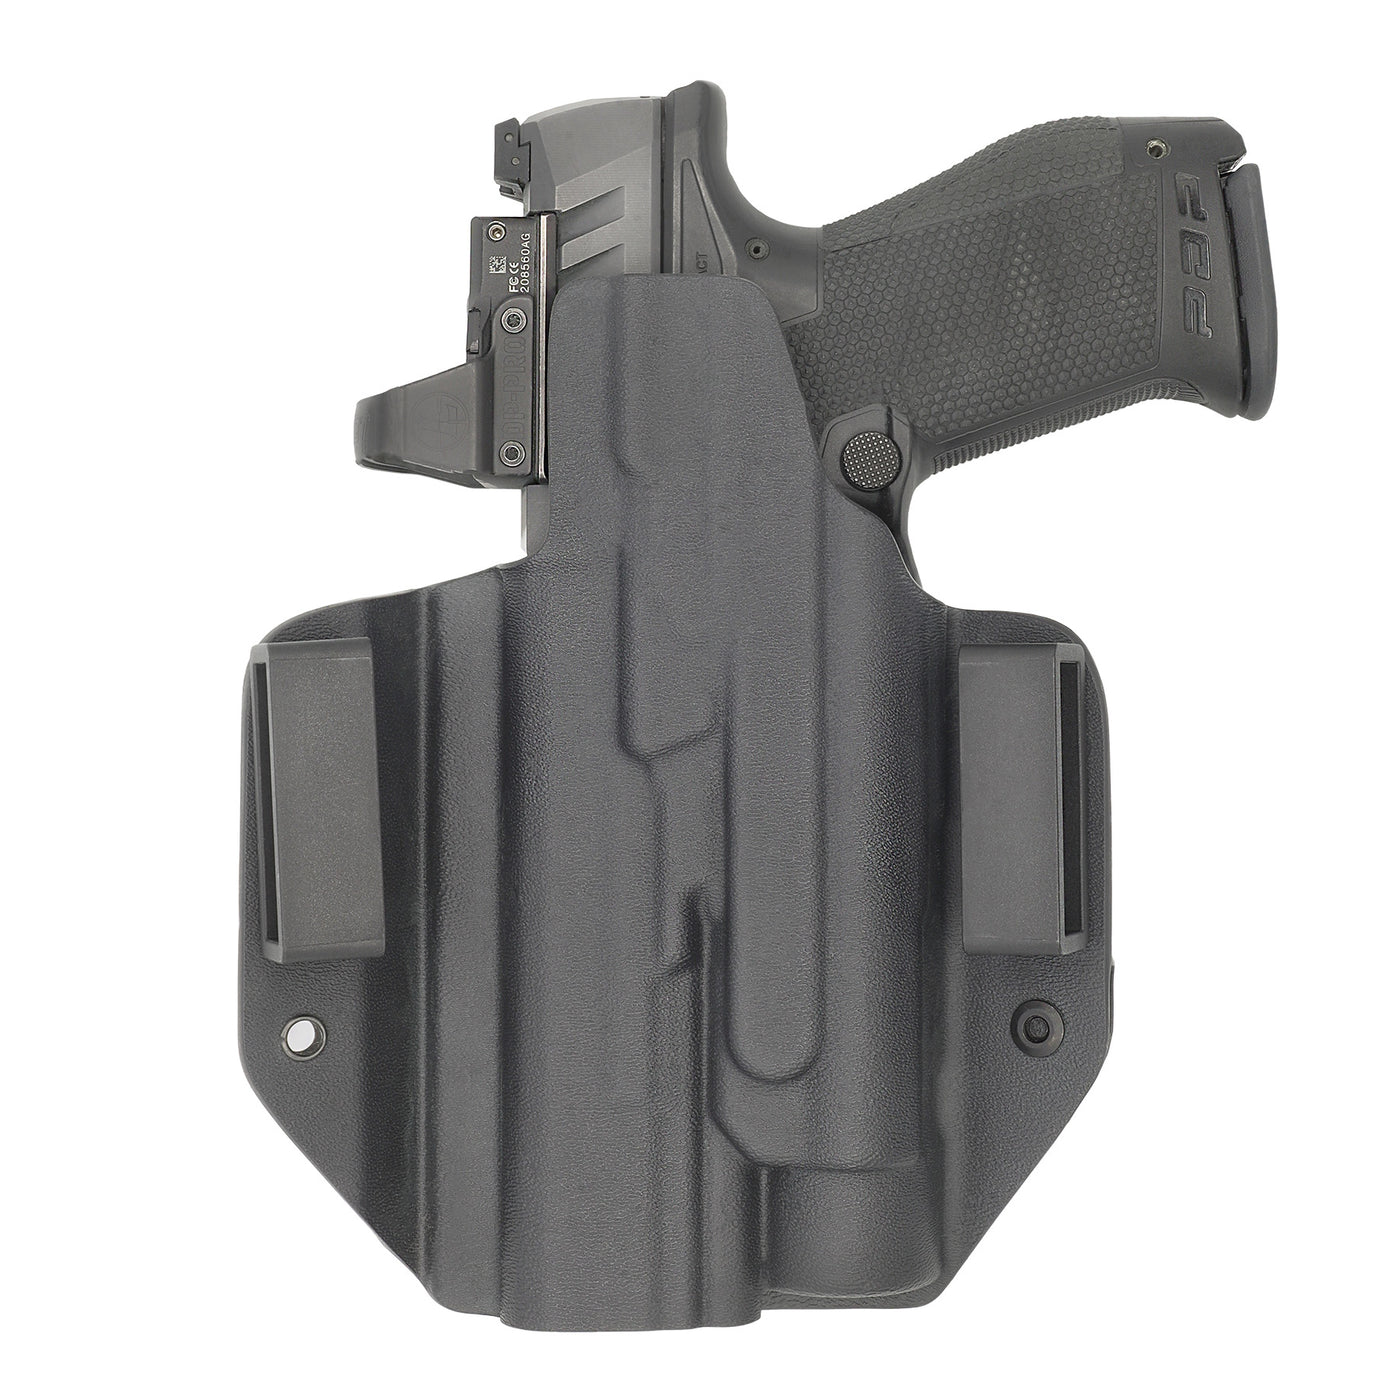 C&G Holsters Quickship OWB Tactical M&P 9/40 Streamlight TLR1 in holstered position back view